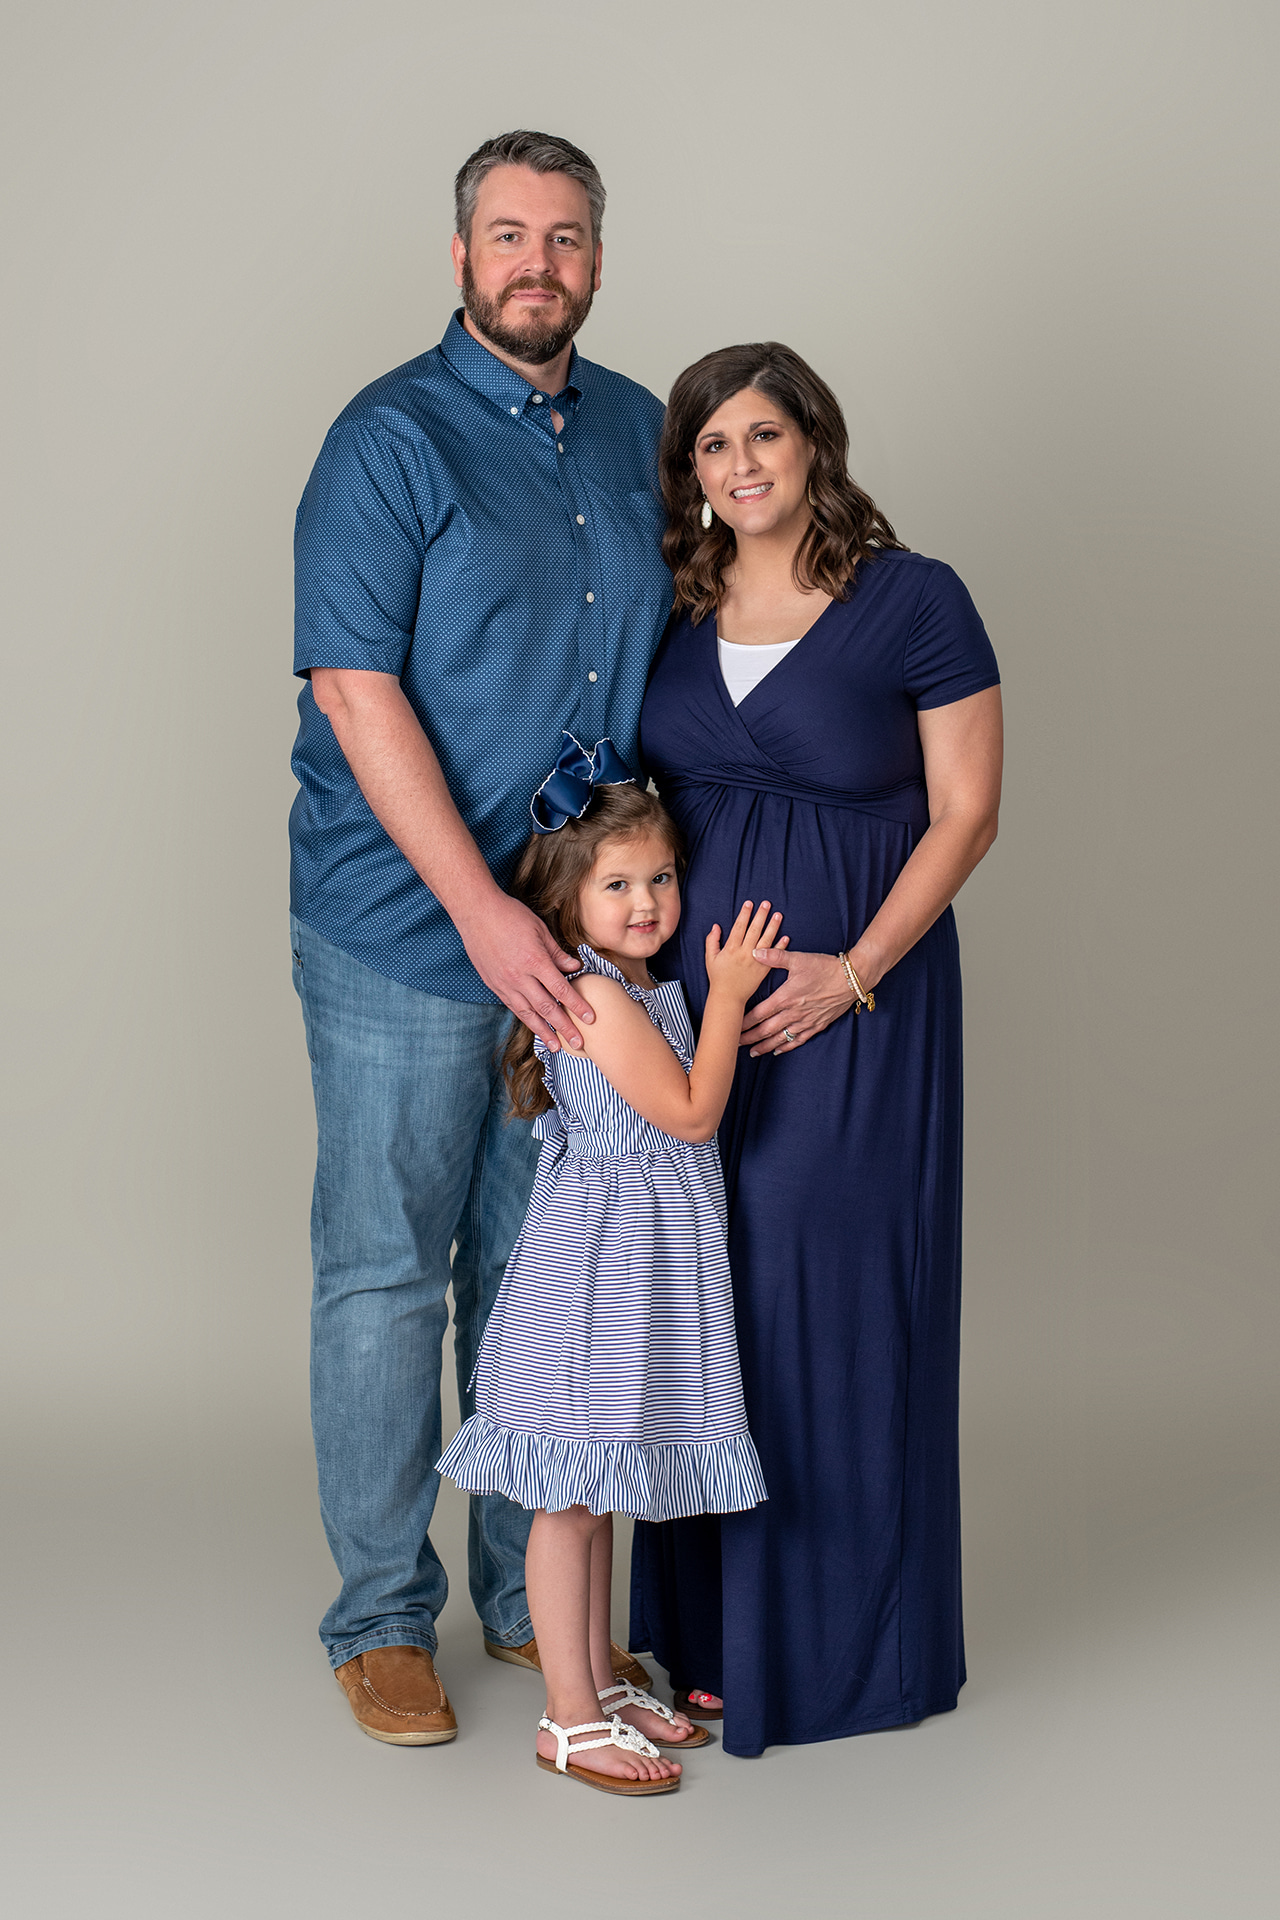 Mom, dad, and child holding mom's baby bump dressed in blue